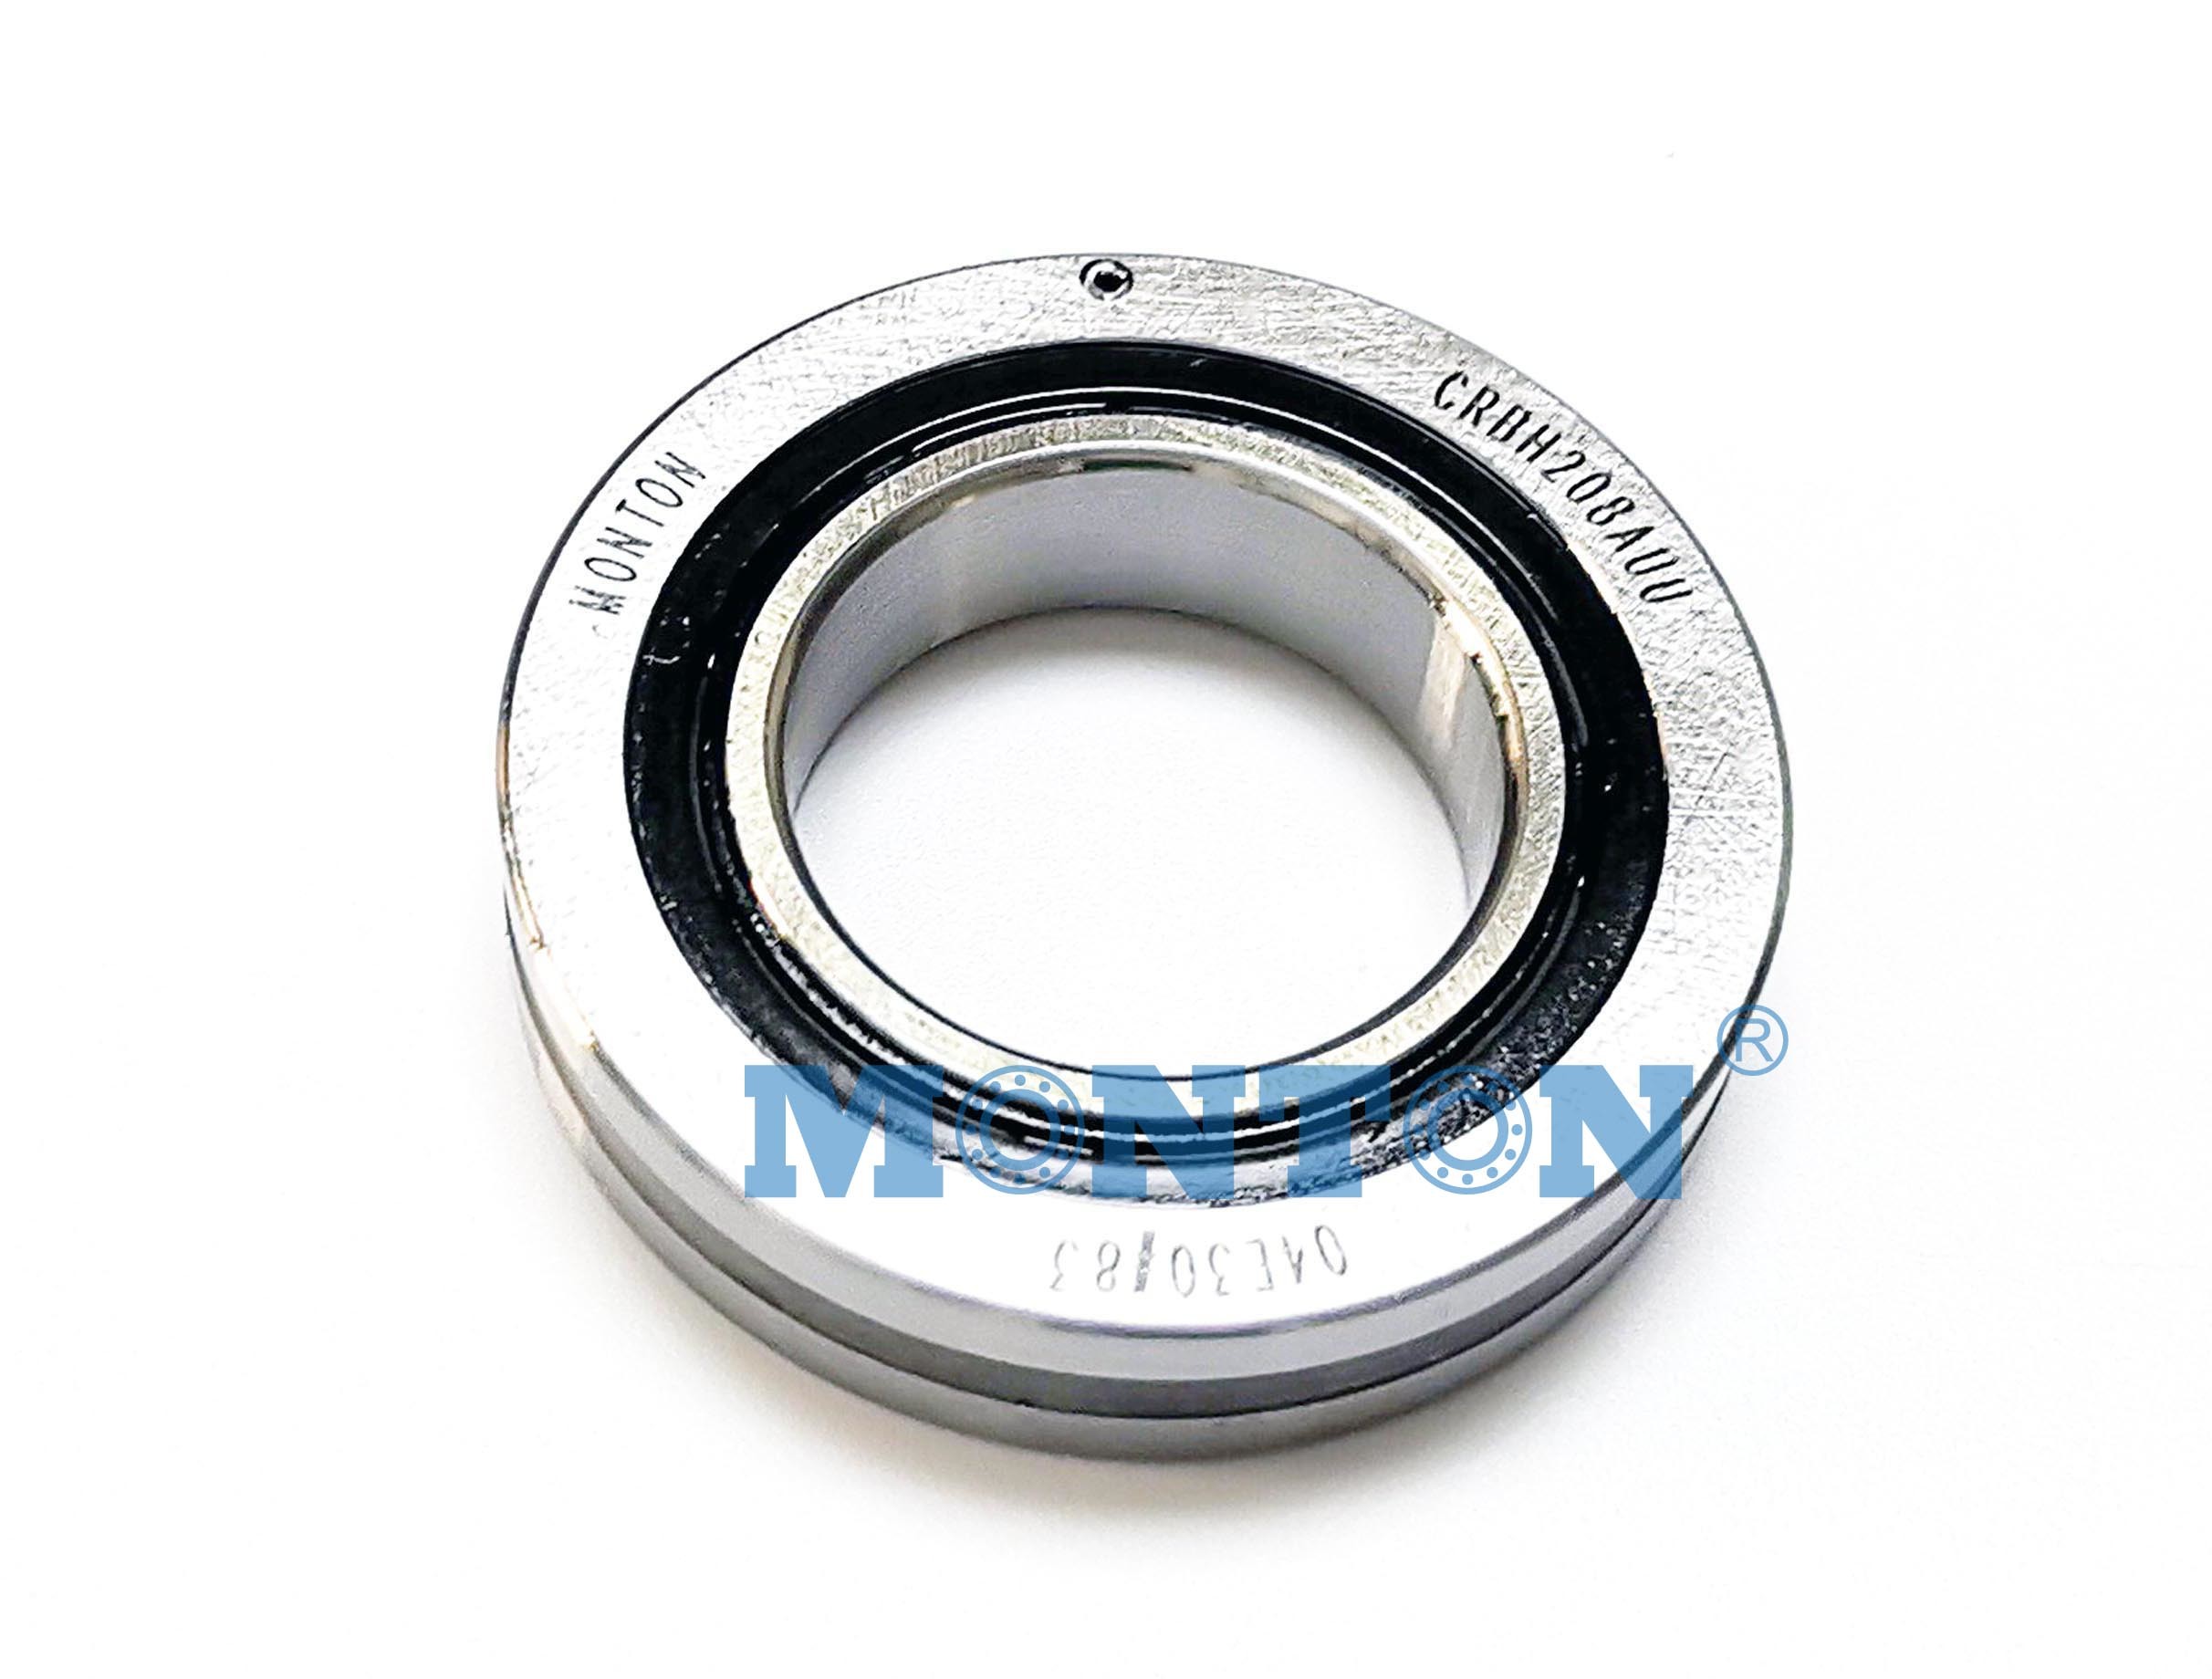 Buy cheap RE15030UUCC0P5 150*230*30mm Crossed roller bearing product